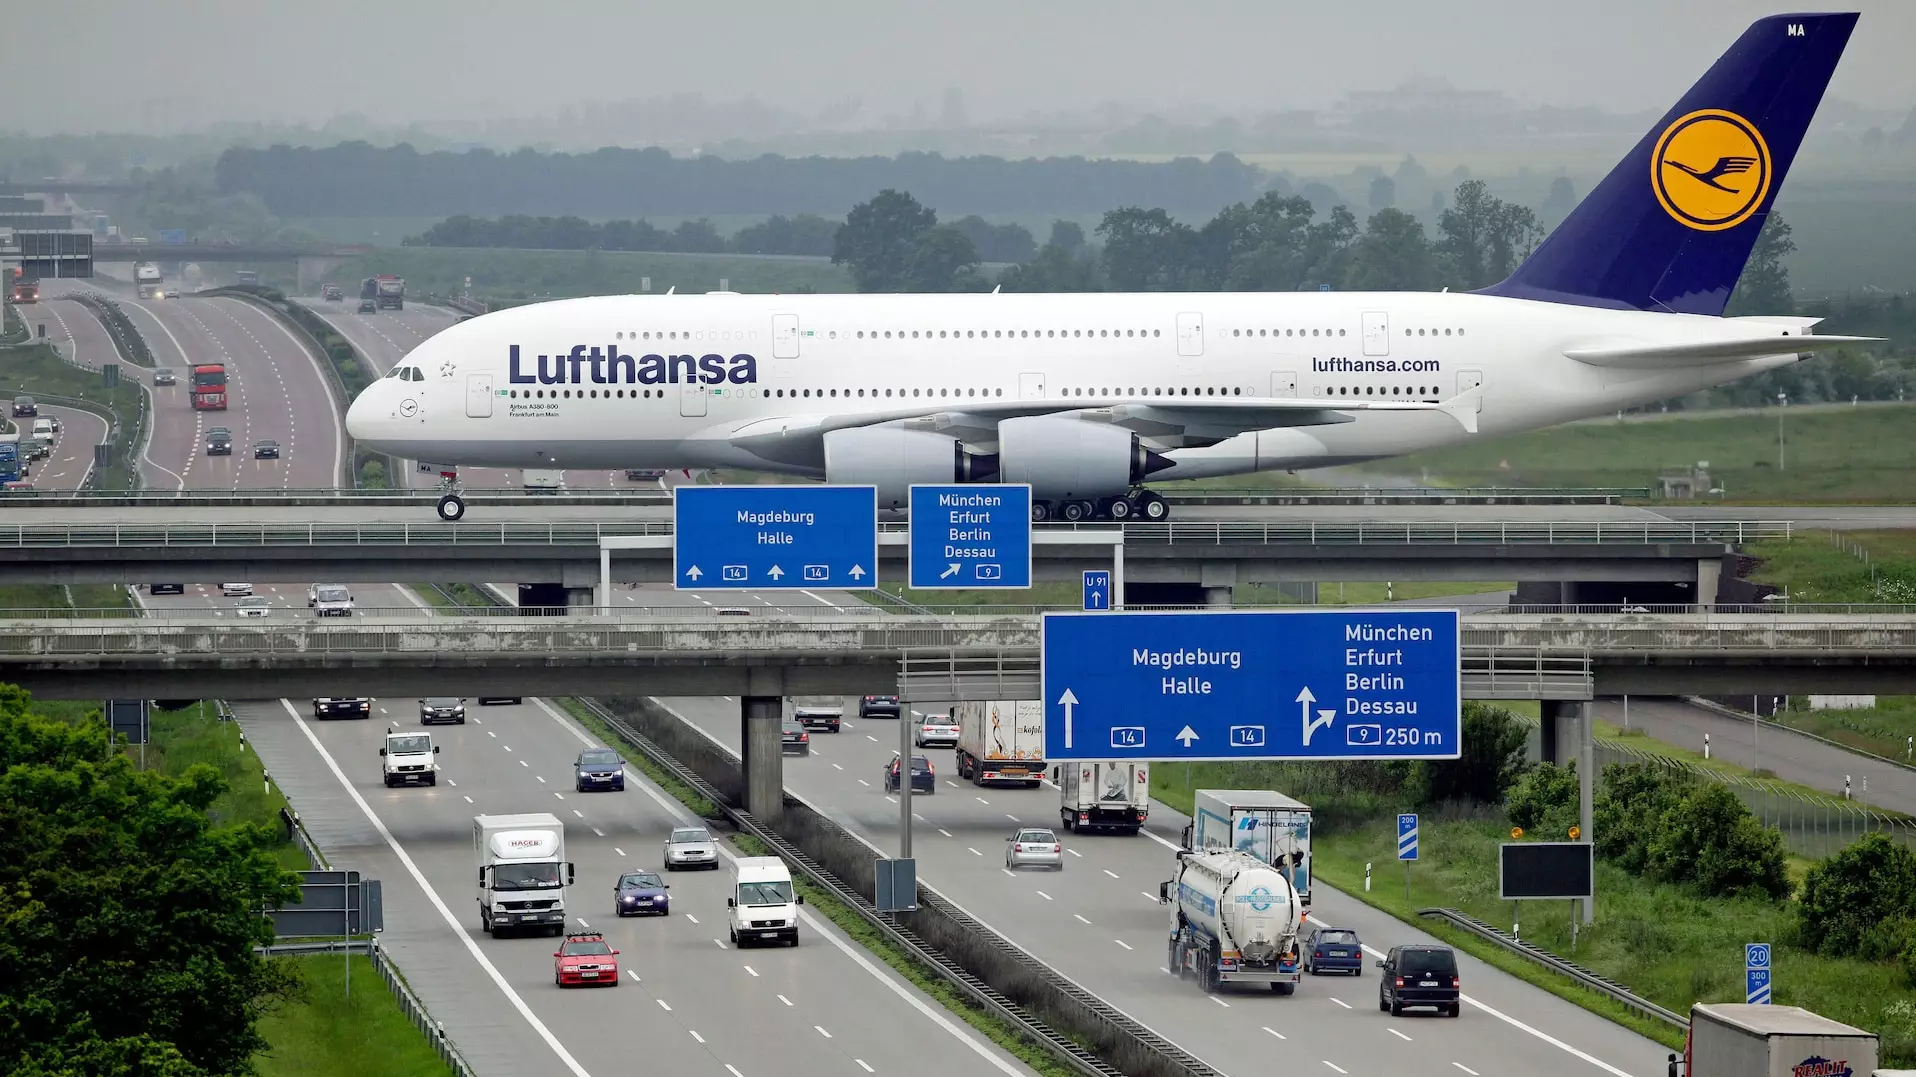 Welcome To The Airport That's Built Over A Motorway, Because Why Not?